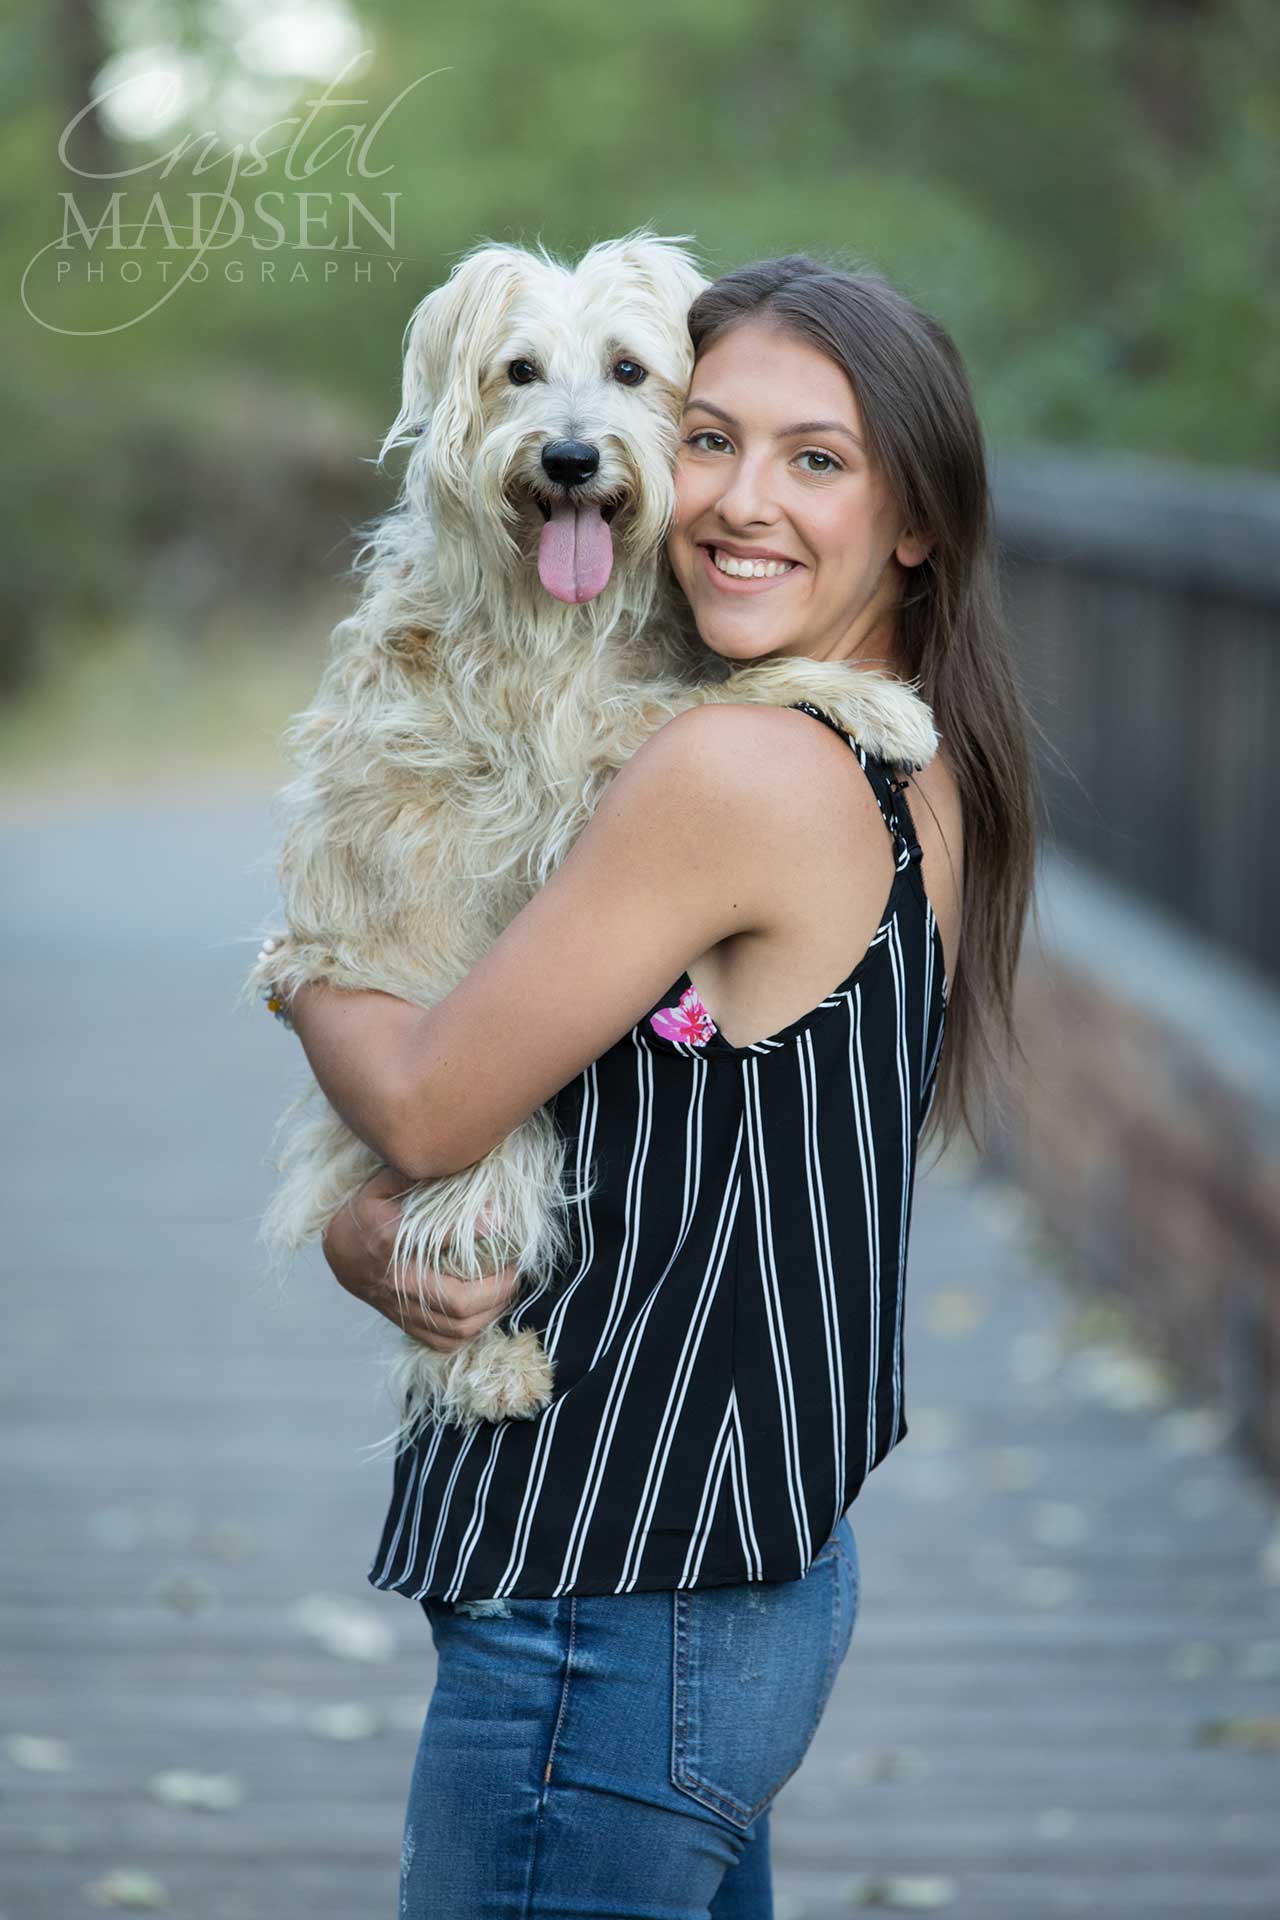 dogs make great props for senior pictures